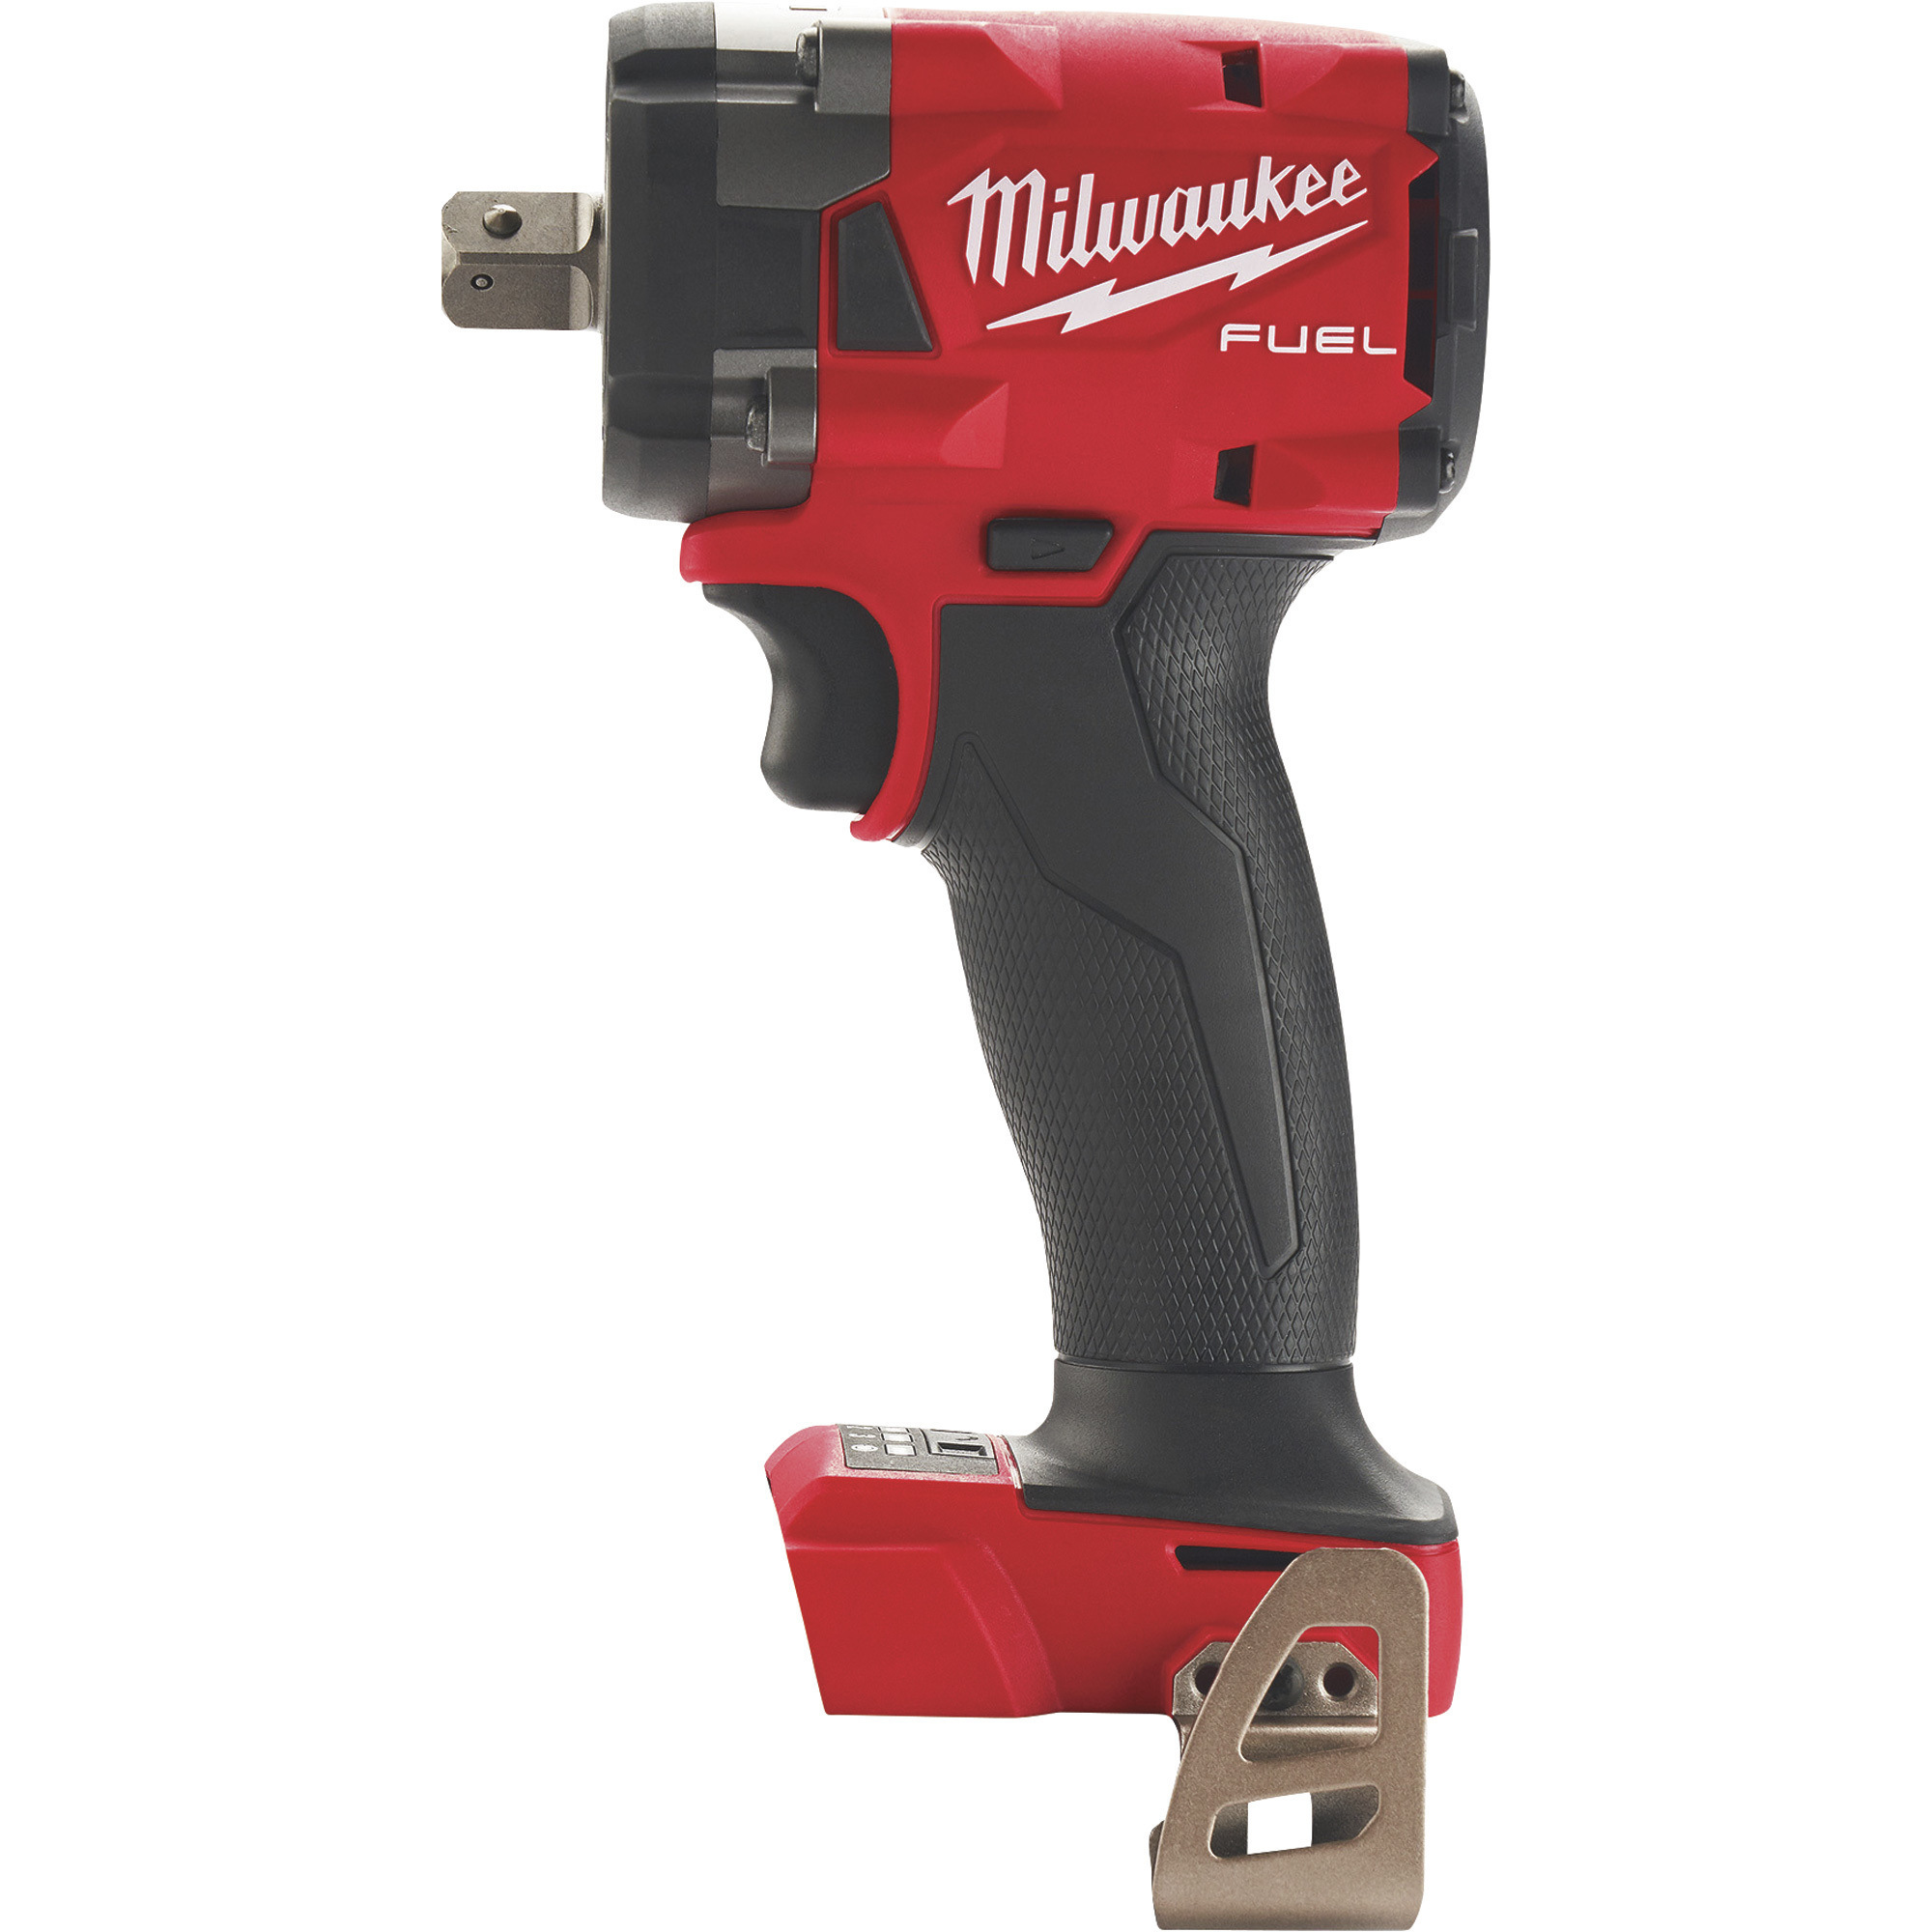 Milwaukee M18 FUEL Compact 1/2in. Impact Wrench with Pin Detent - Tool Only, Model 2855P-20